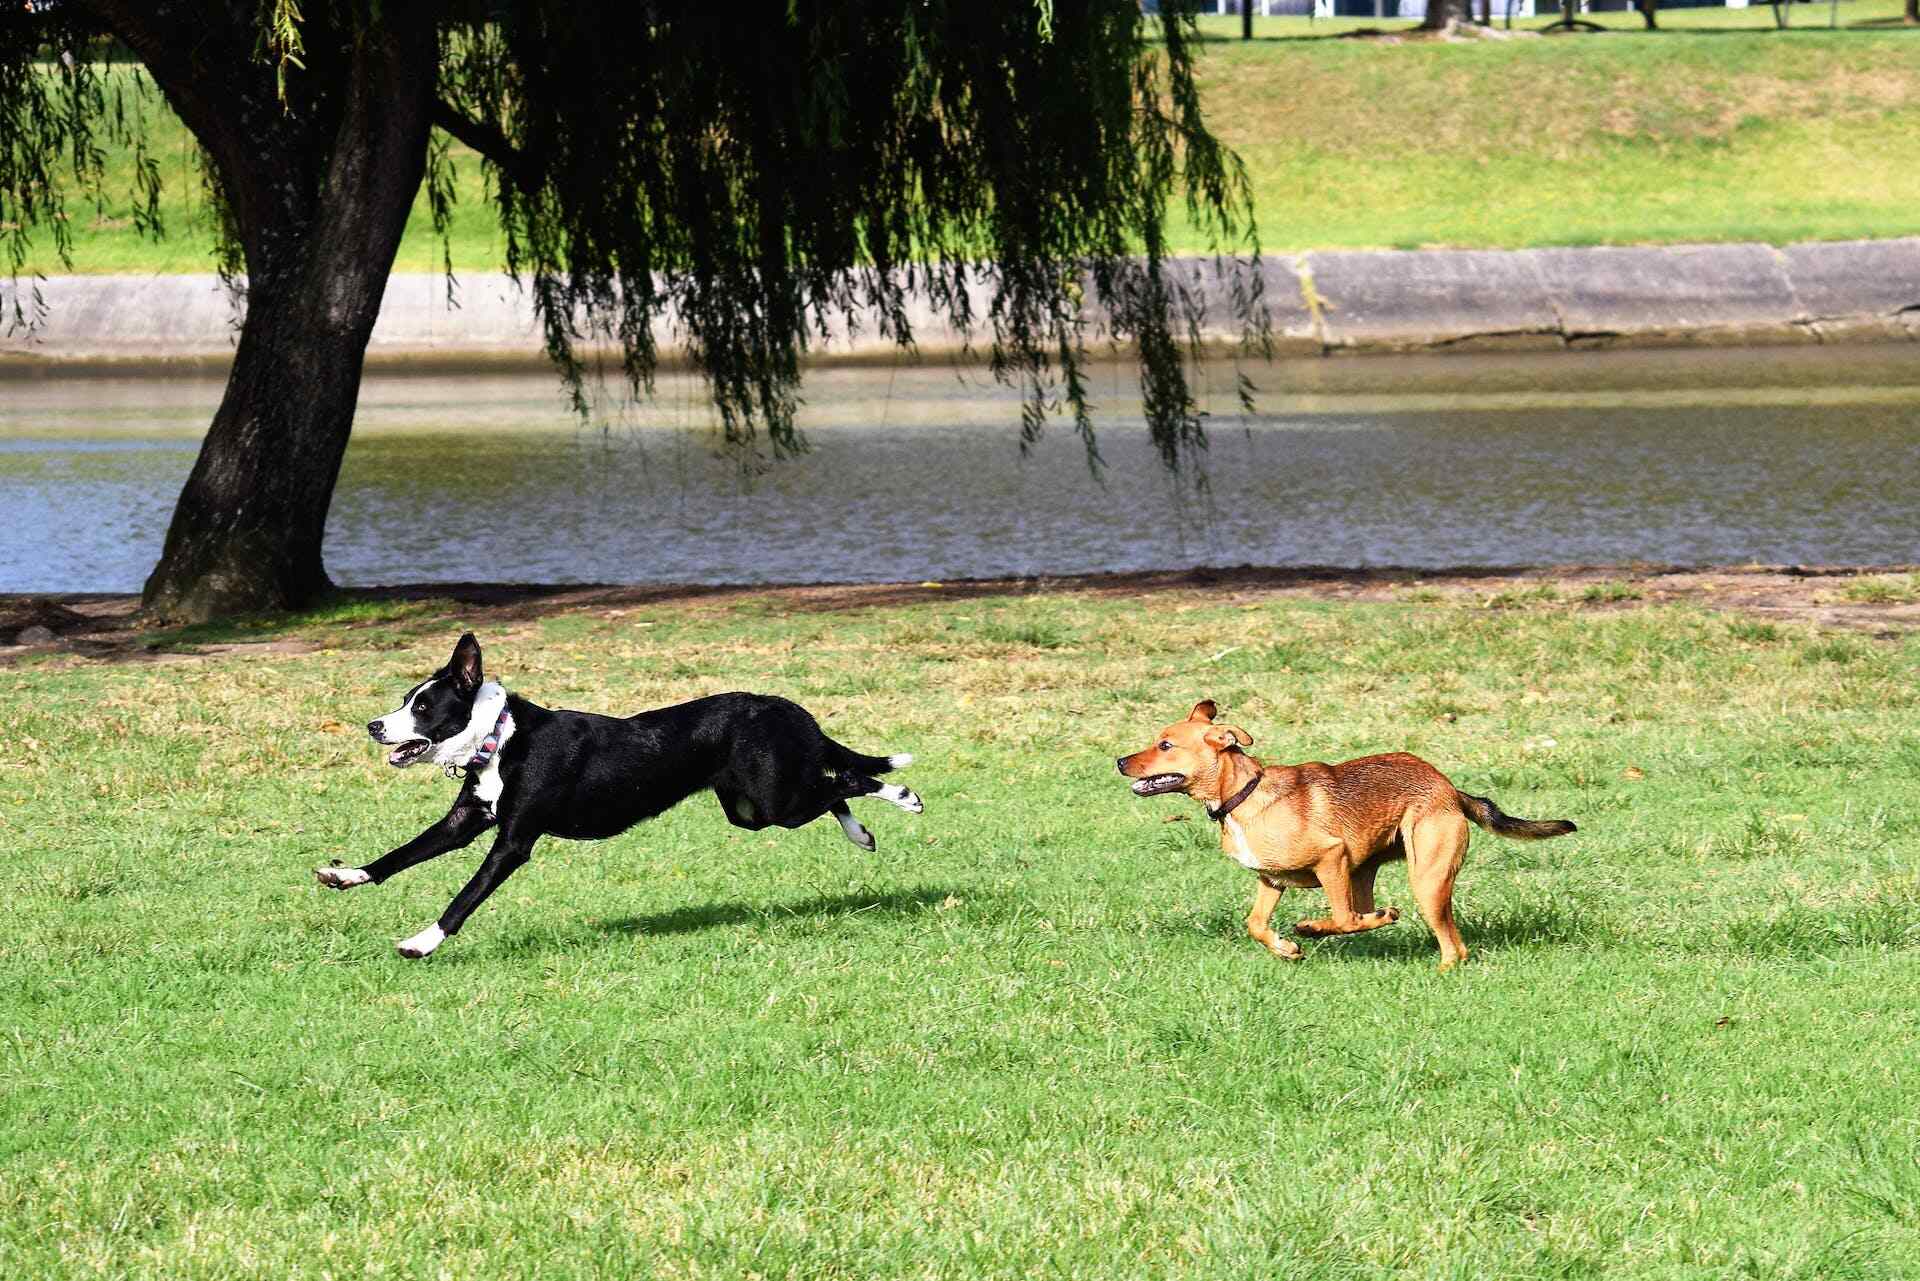 A pair of dogs chasing each other in a green space next to a river